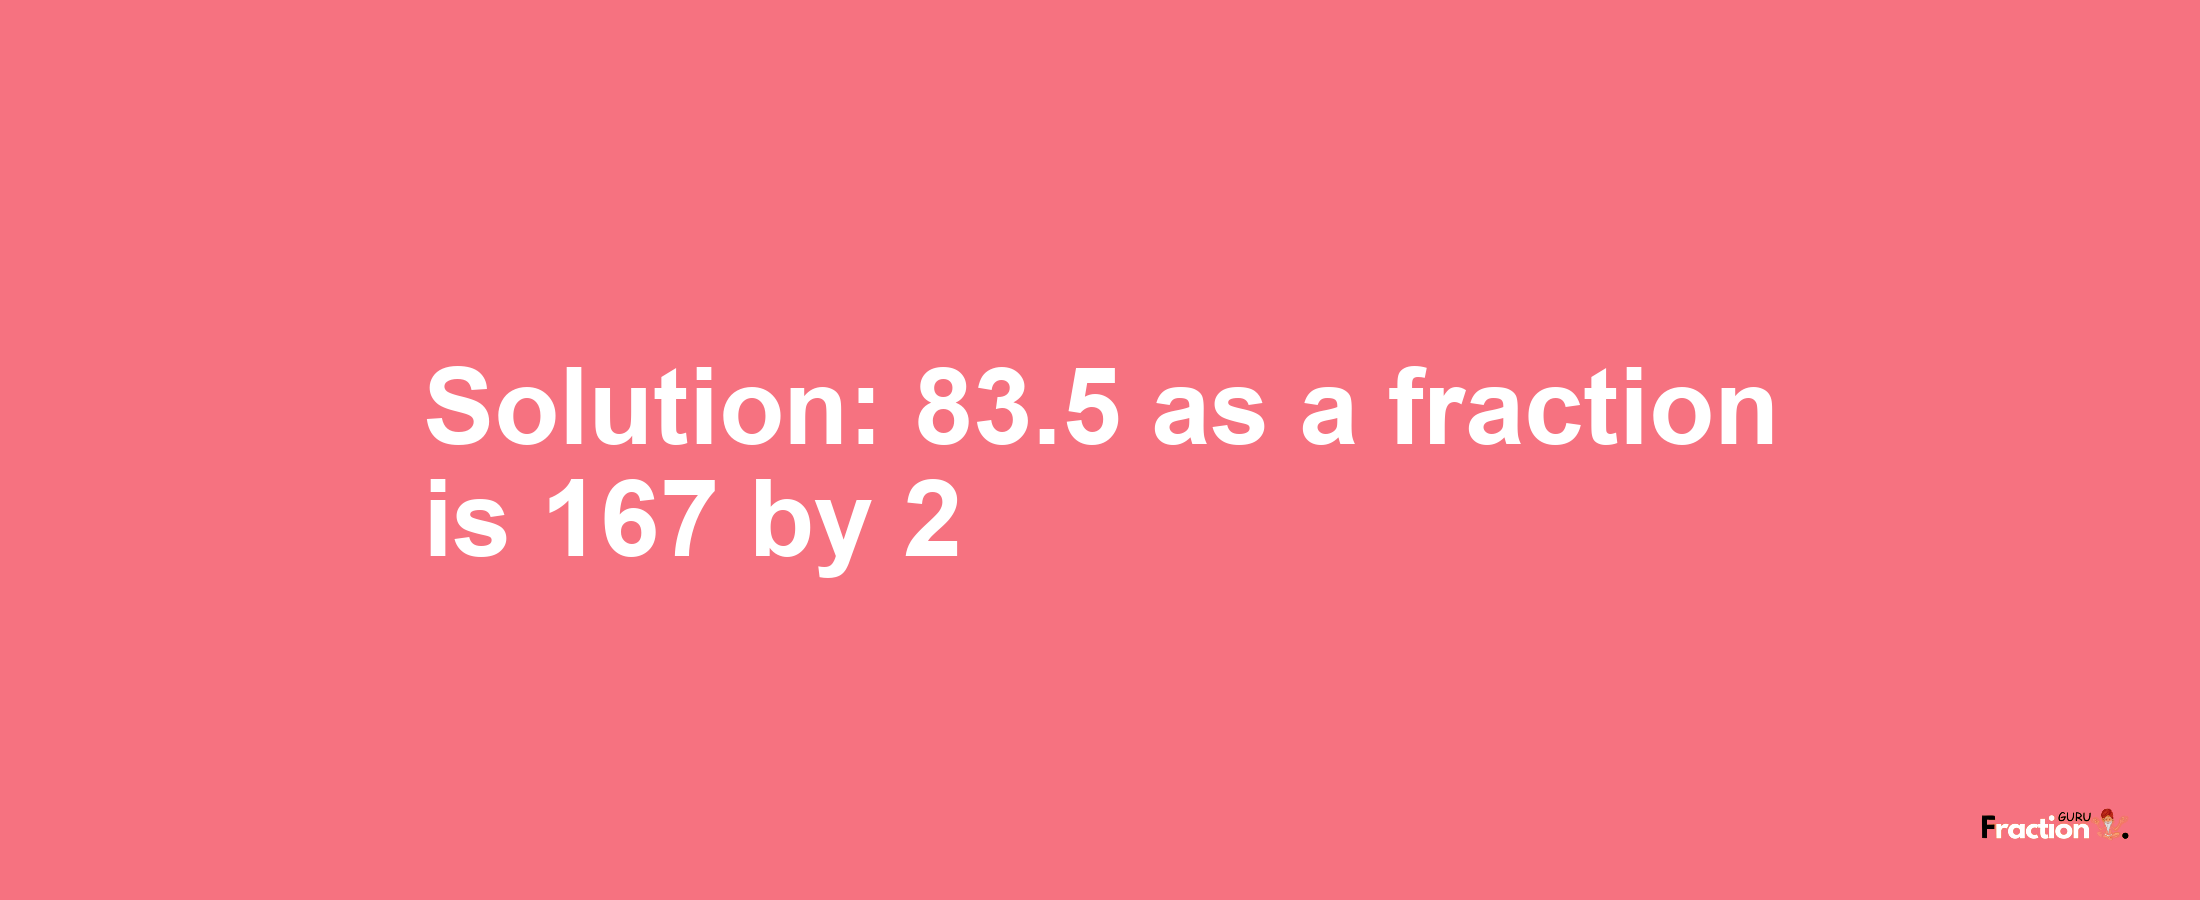 Solution:83.5 as a fraction is 167/2